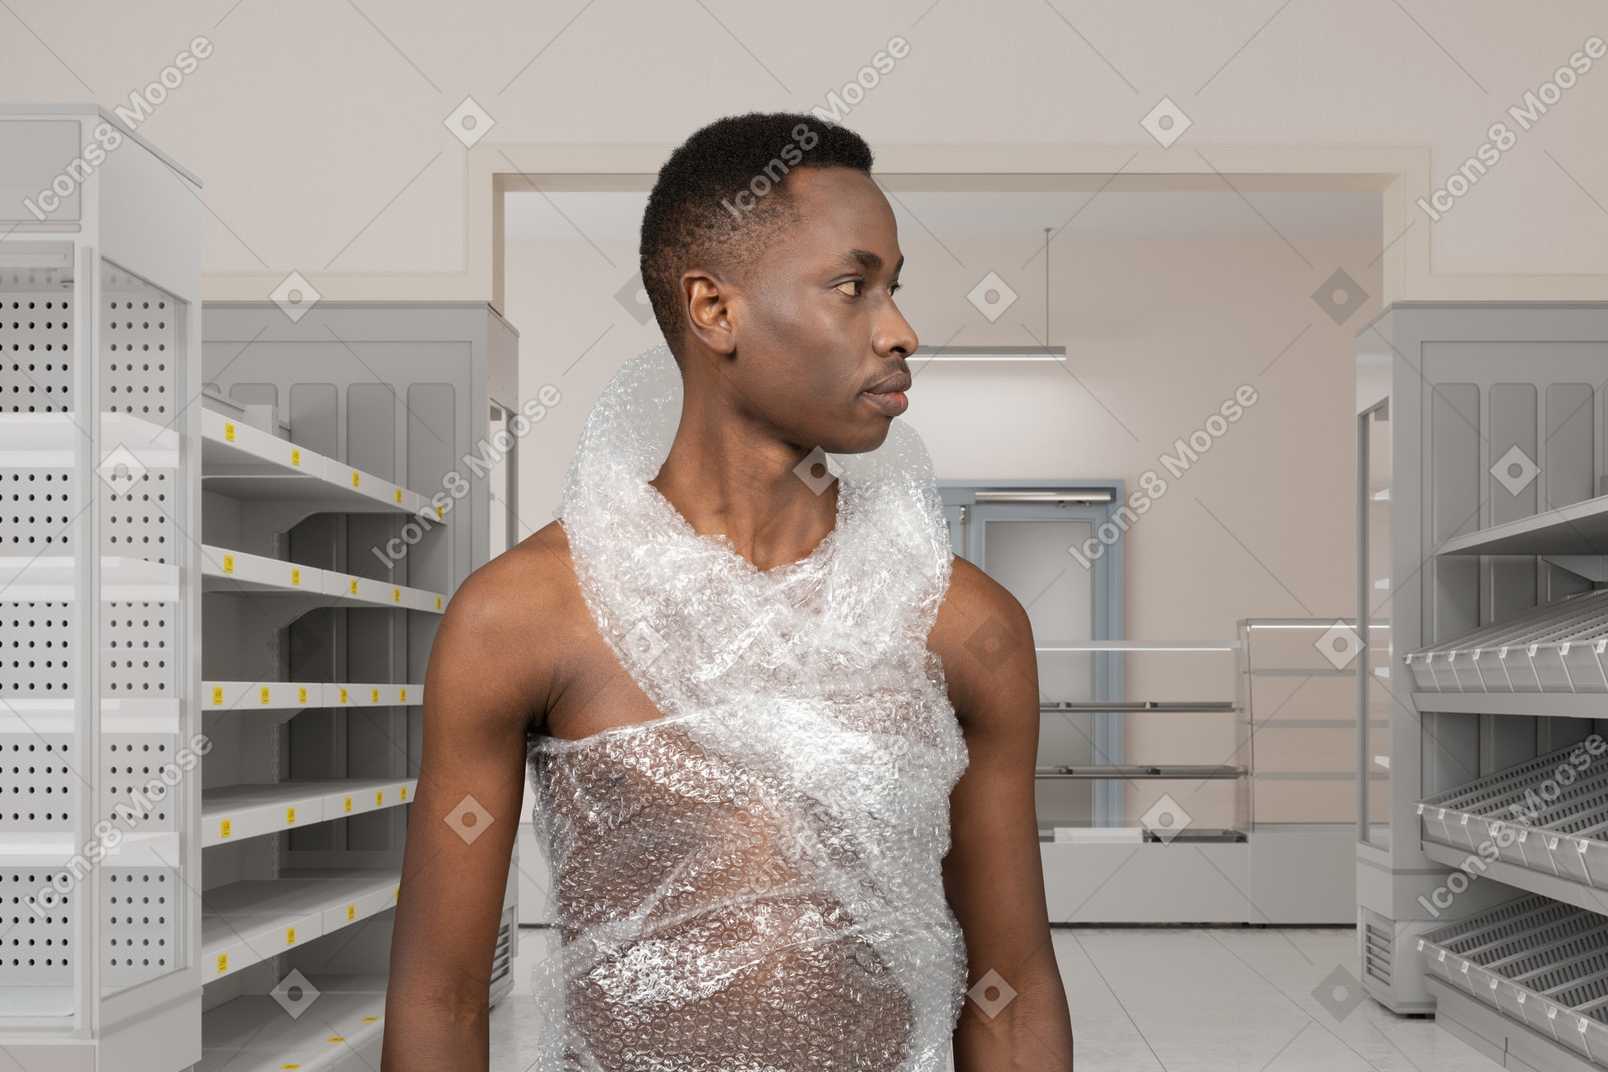 A man wearing a plastic wrap around his neck